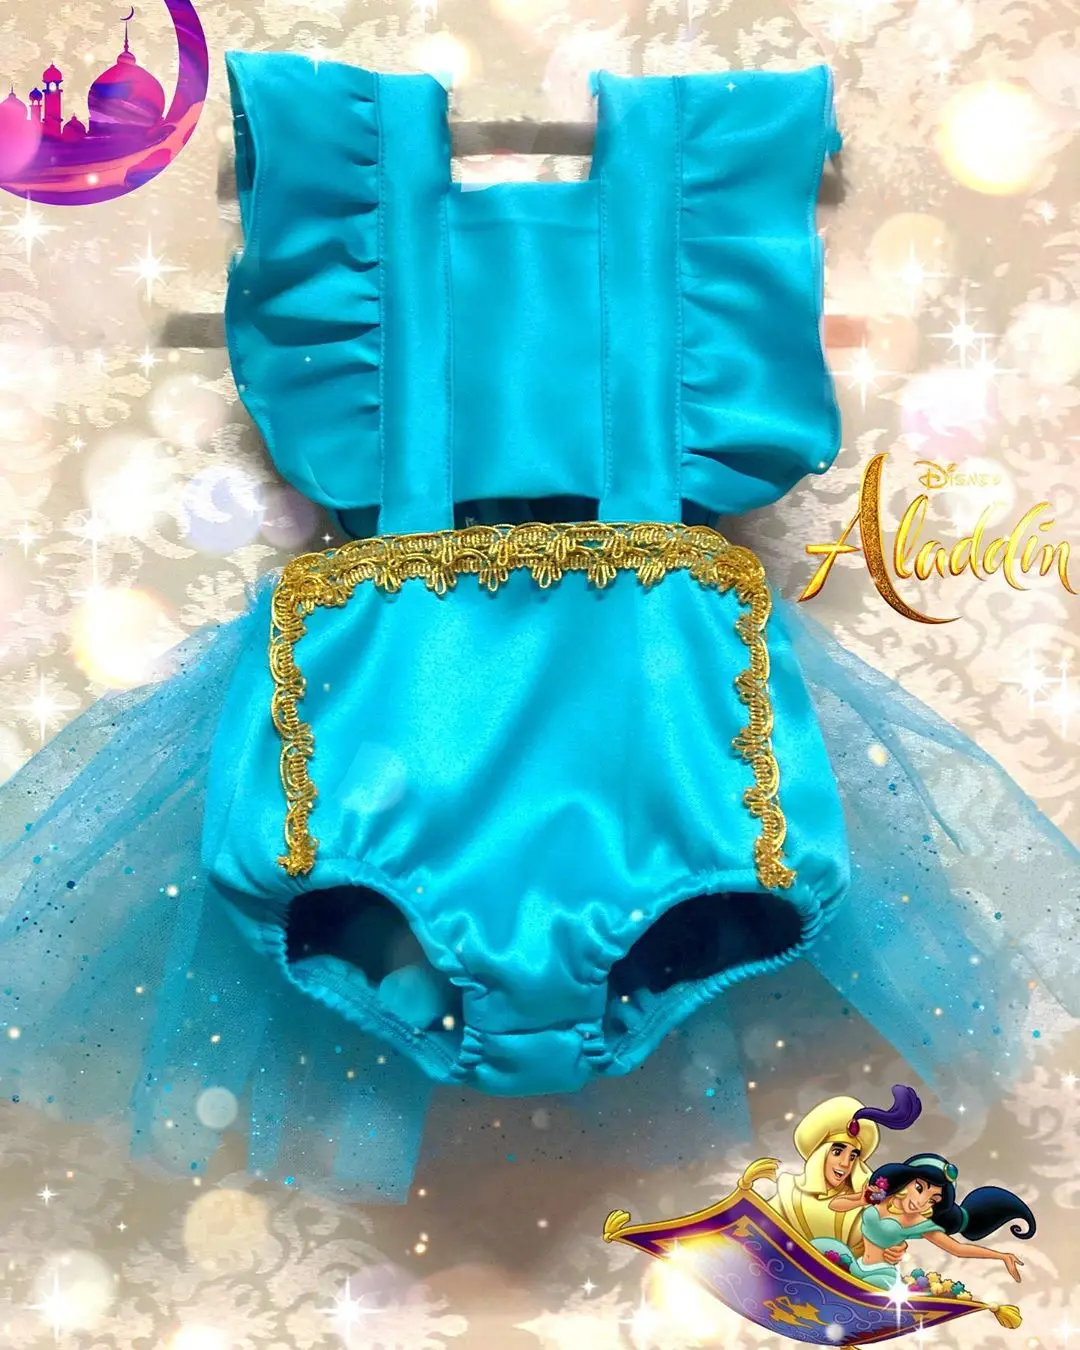 Baby Girls Bodysuit Dress Princess Blue Costume Backless Sleeveless Halloween Party Cosplay Party Clothes Summer Cute Kids Suit